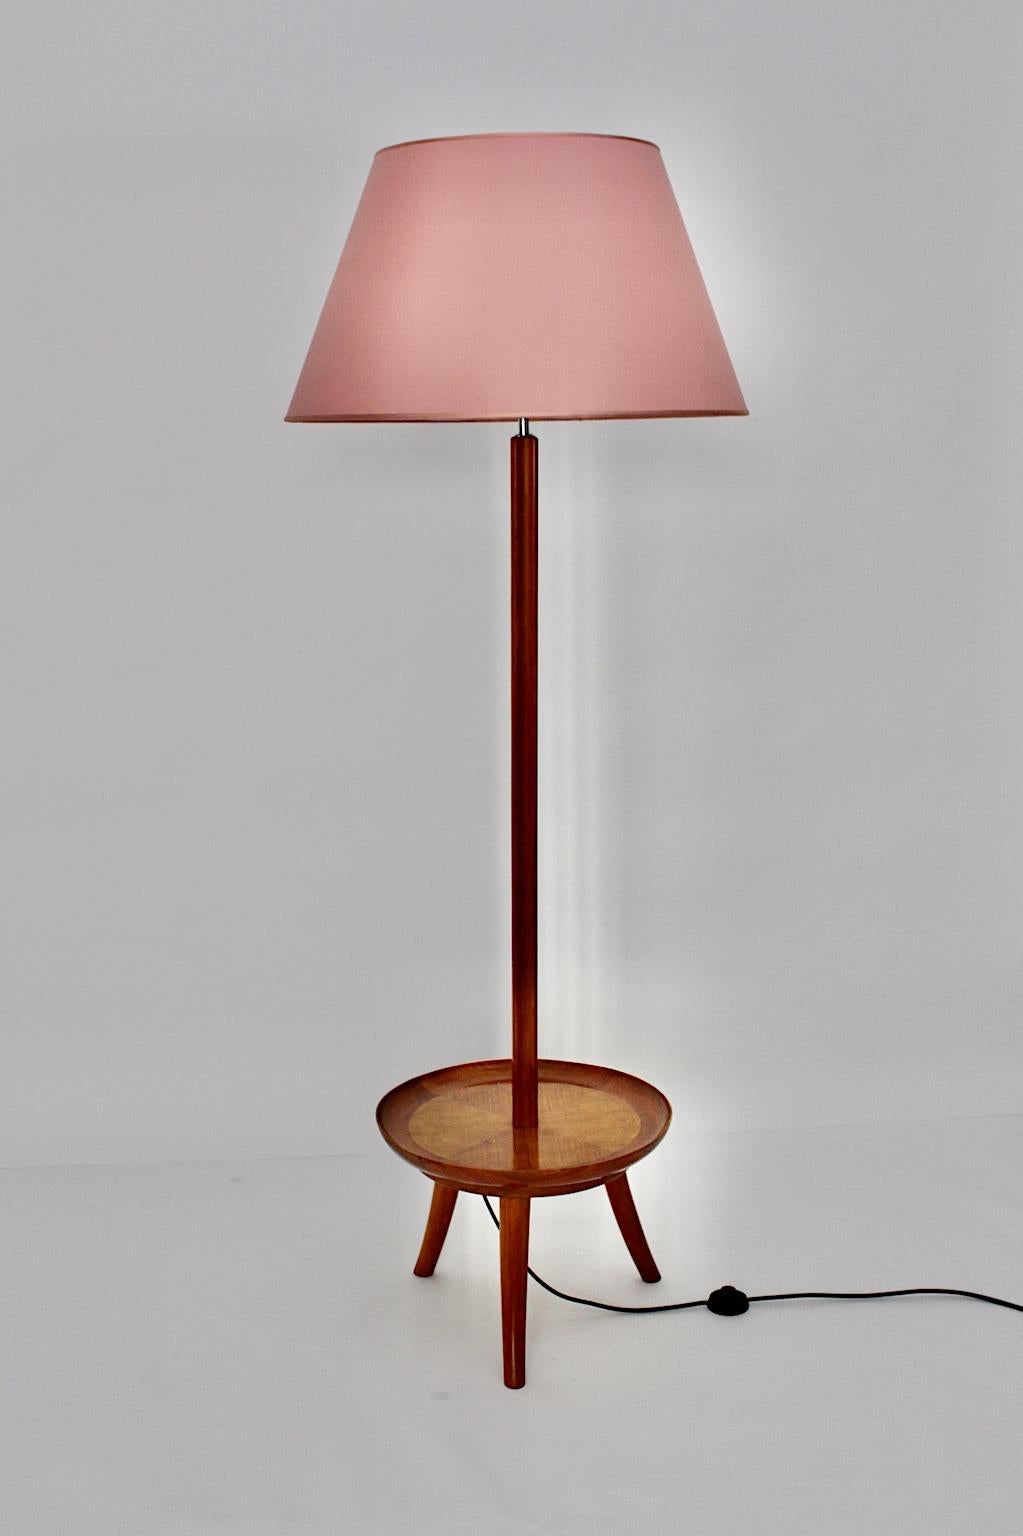 Art Deco floor lamp from solid cherrywood and veneered cherrywood designed in the style of Josef Frank and manufactured 1930s, Vienna.
A wonderful floor lamp with a composition of a circular like table with a stellar veneered plate also with a